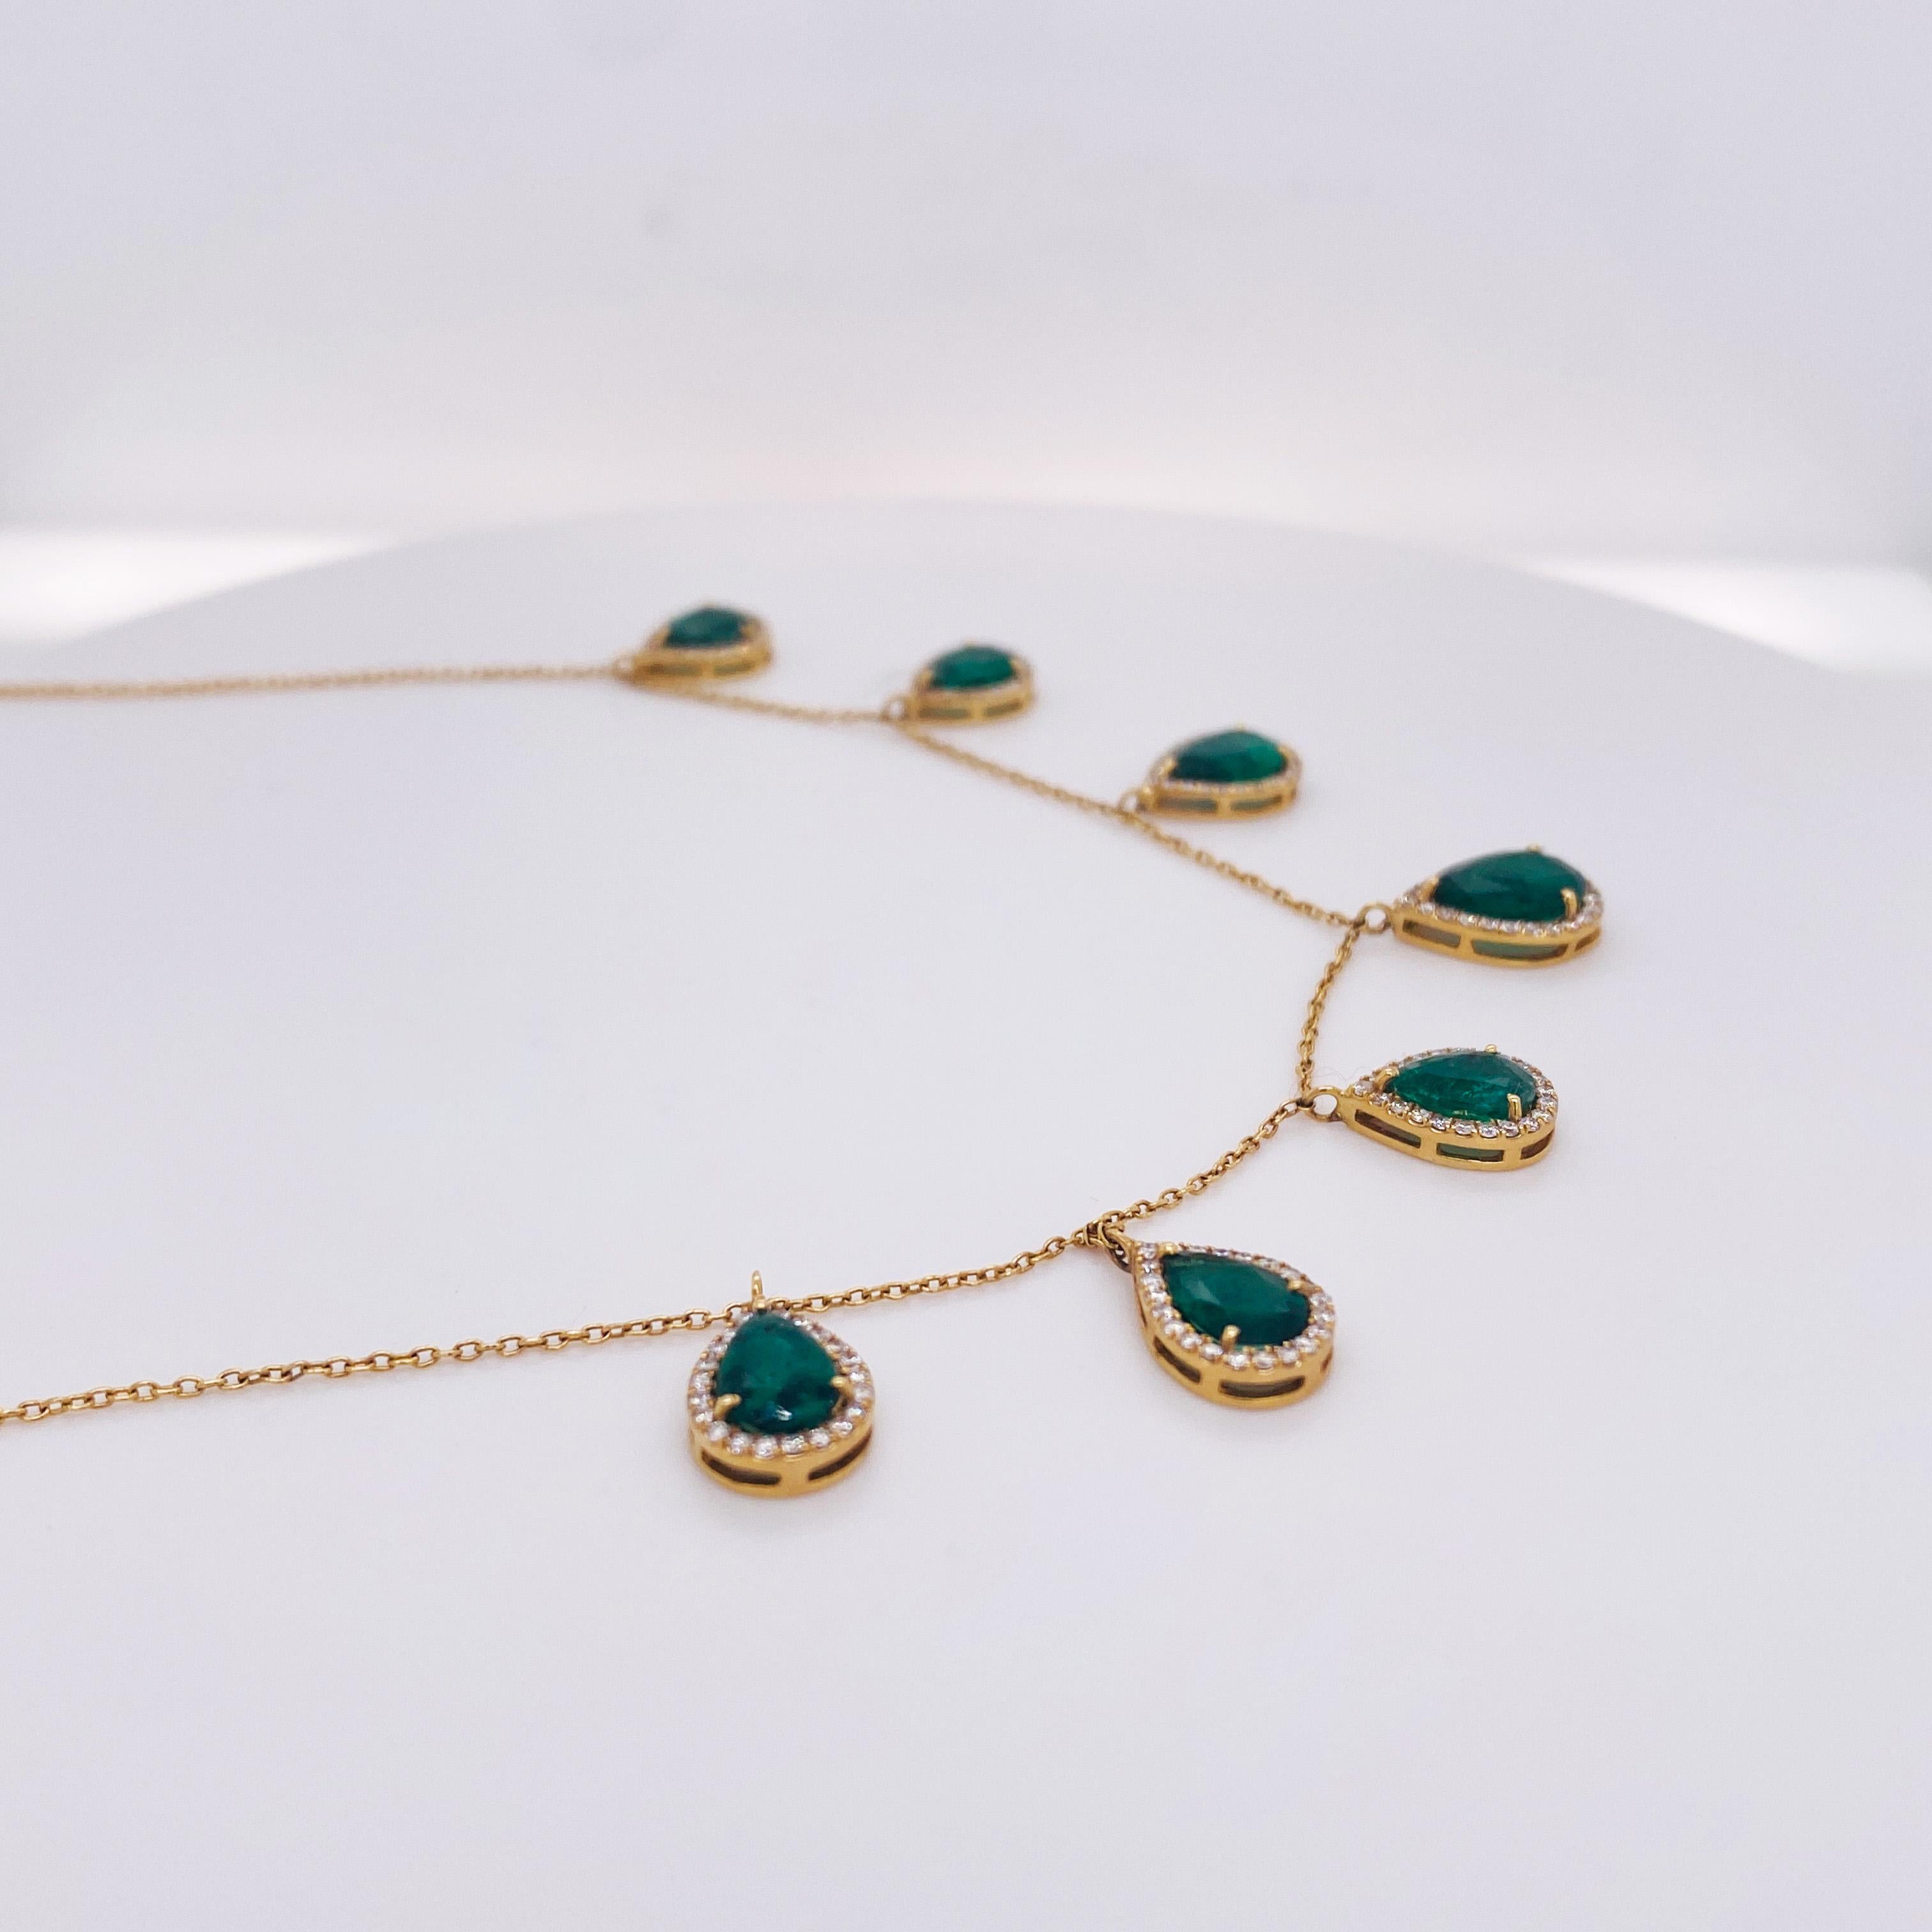 Rock the look you love with these magnificent emerald and diamond drops! Your jewelry collection will be as stunning as yourself with this cascading necklace of emeralds ringed with diamonds! Emeralds are the birthstone for May. This show stopping